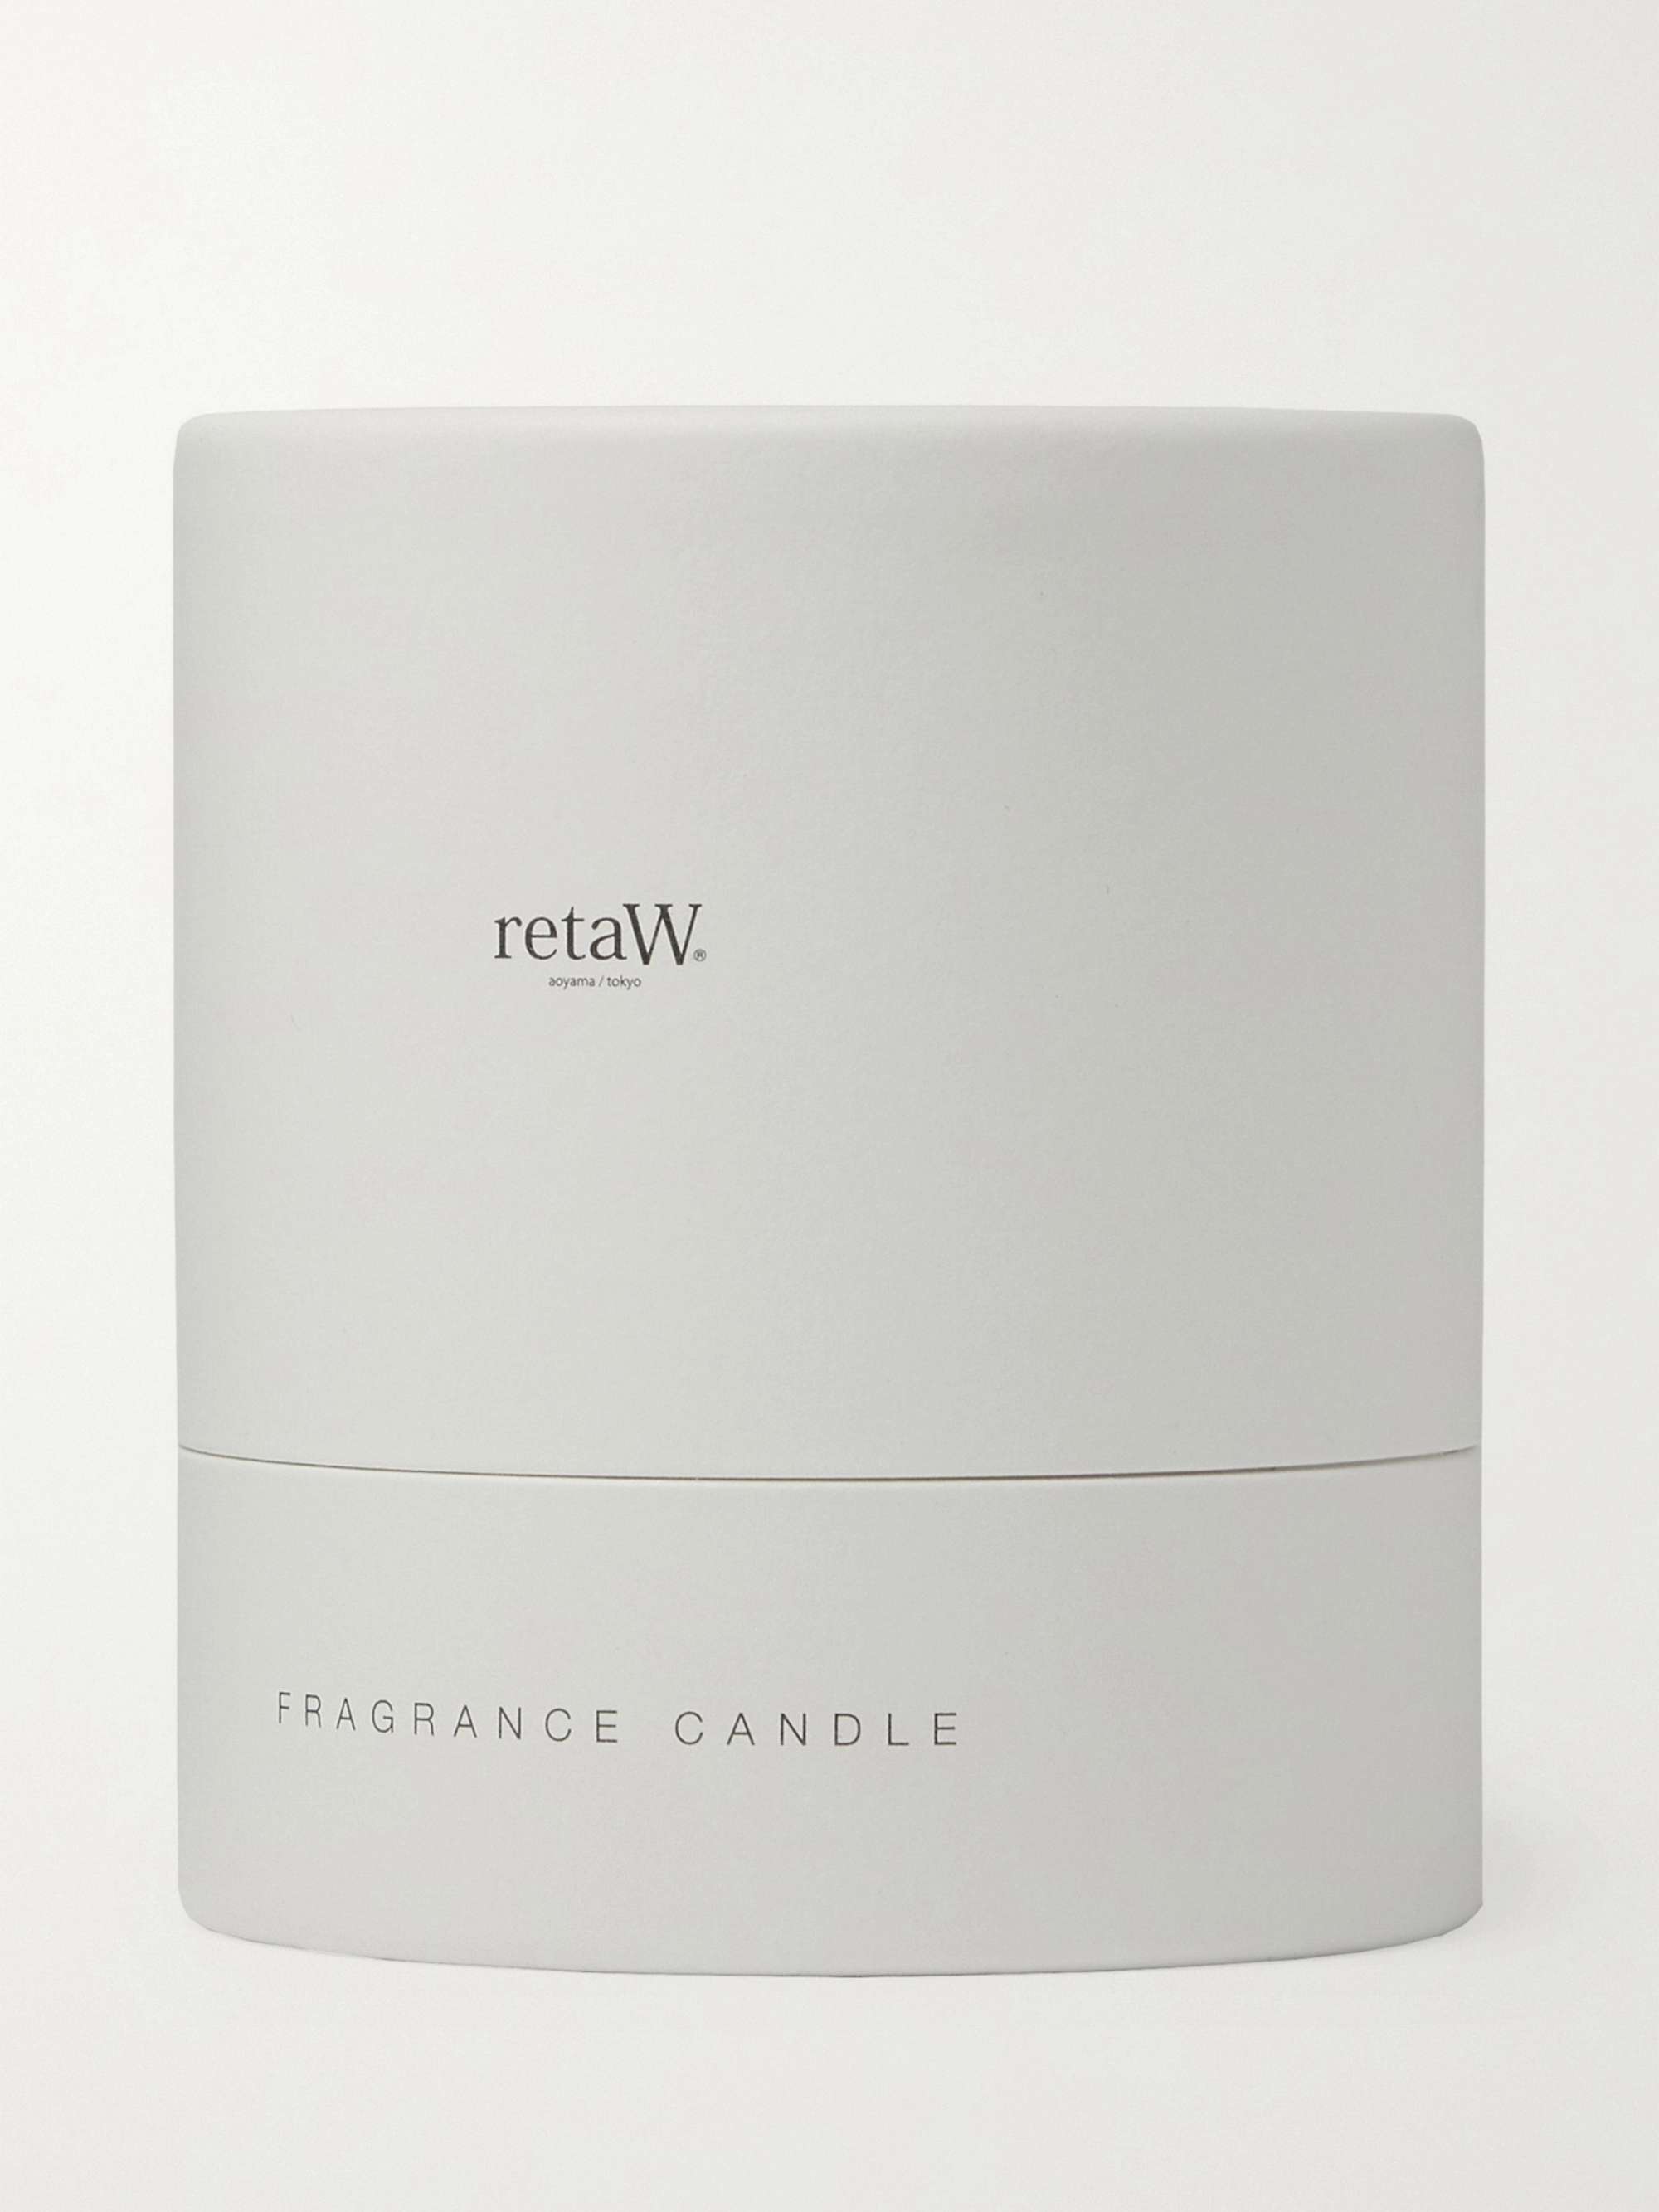 RETAW Natural Mystic Scented Candle, 145g